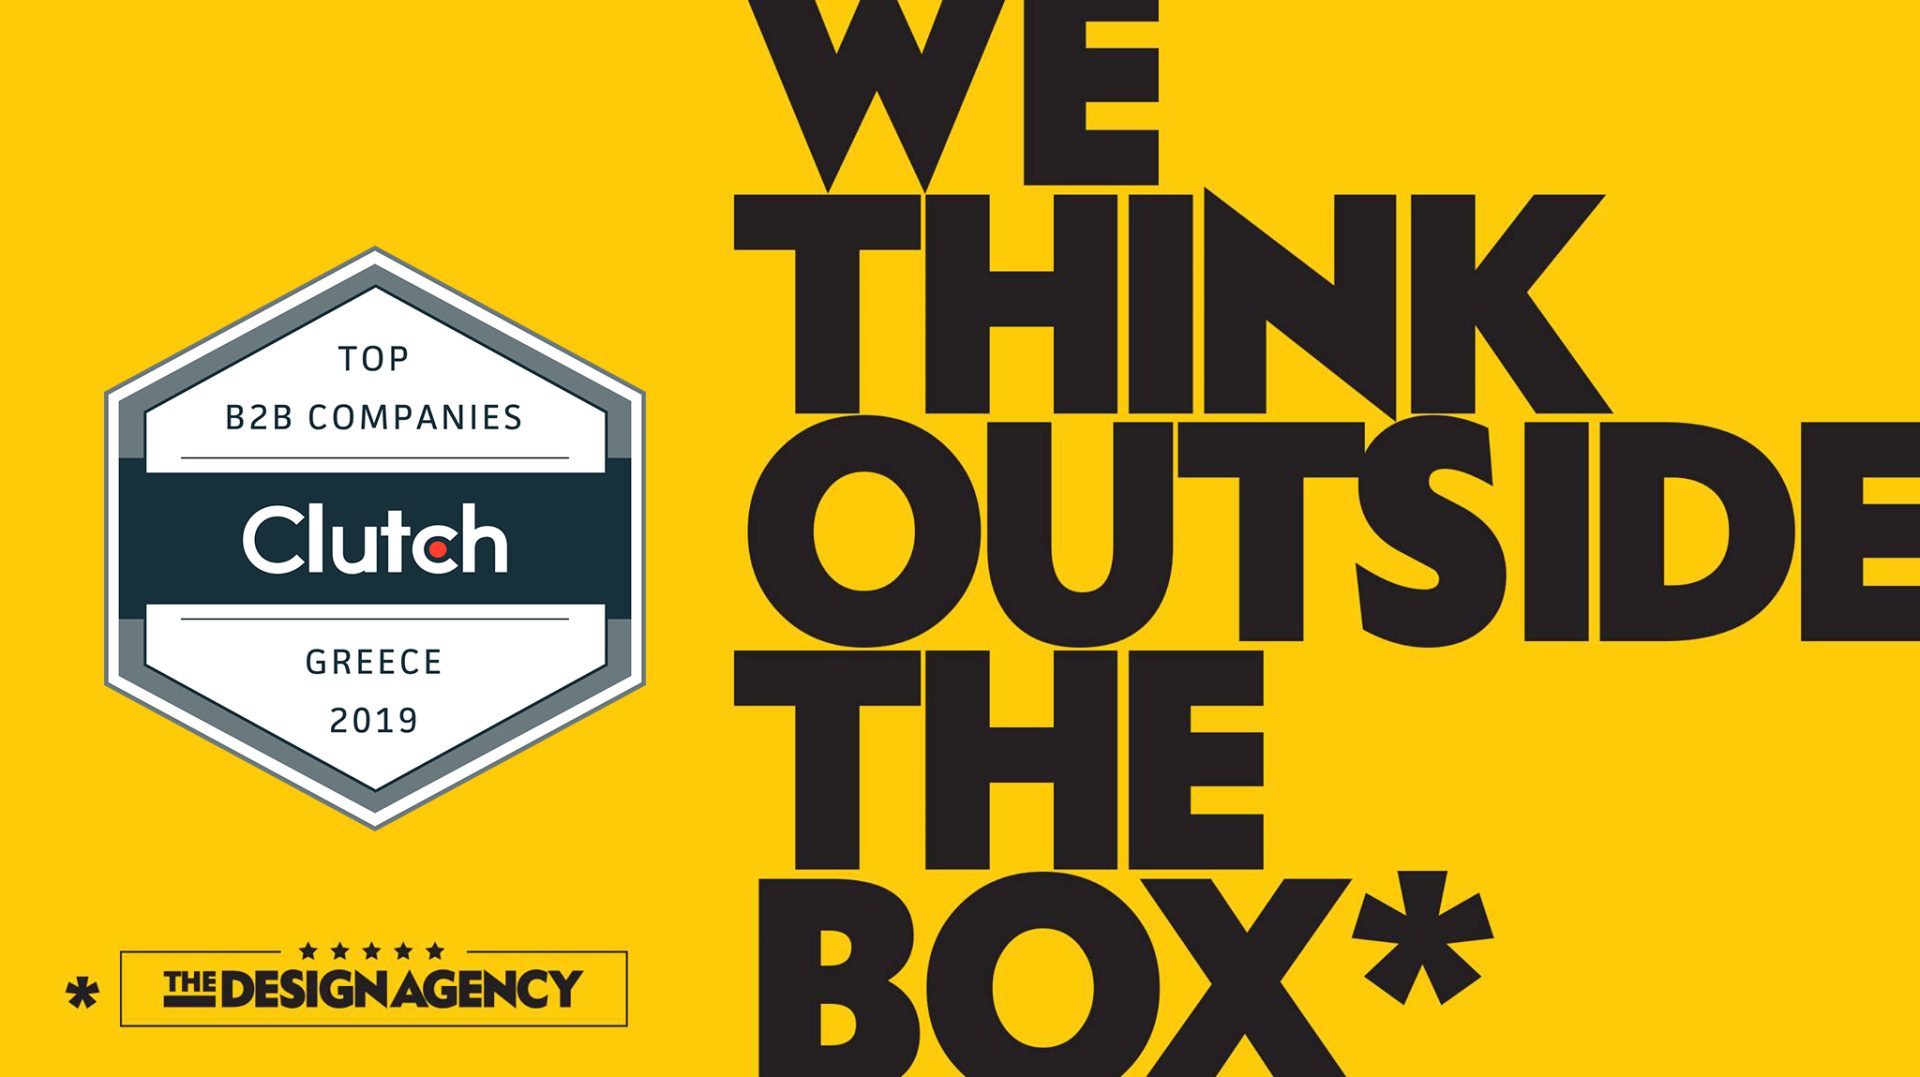 Clutch Names the Design Agency Greece A Top Development Firm In Western Europe